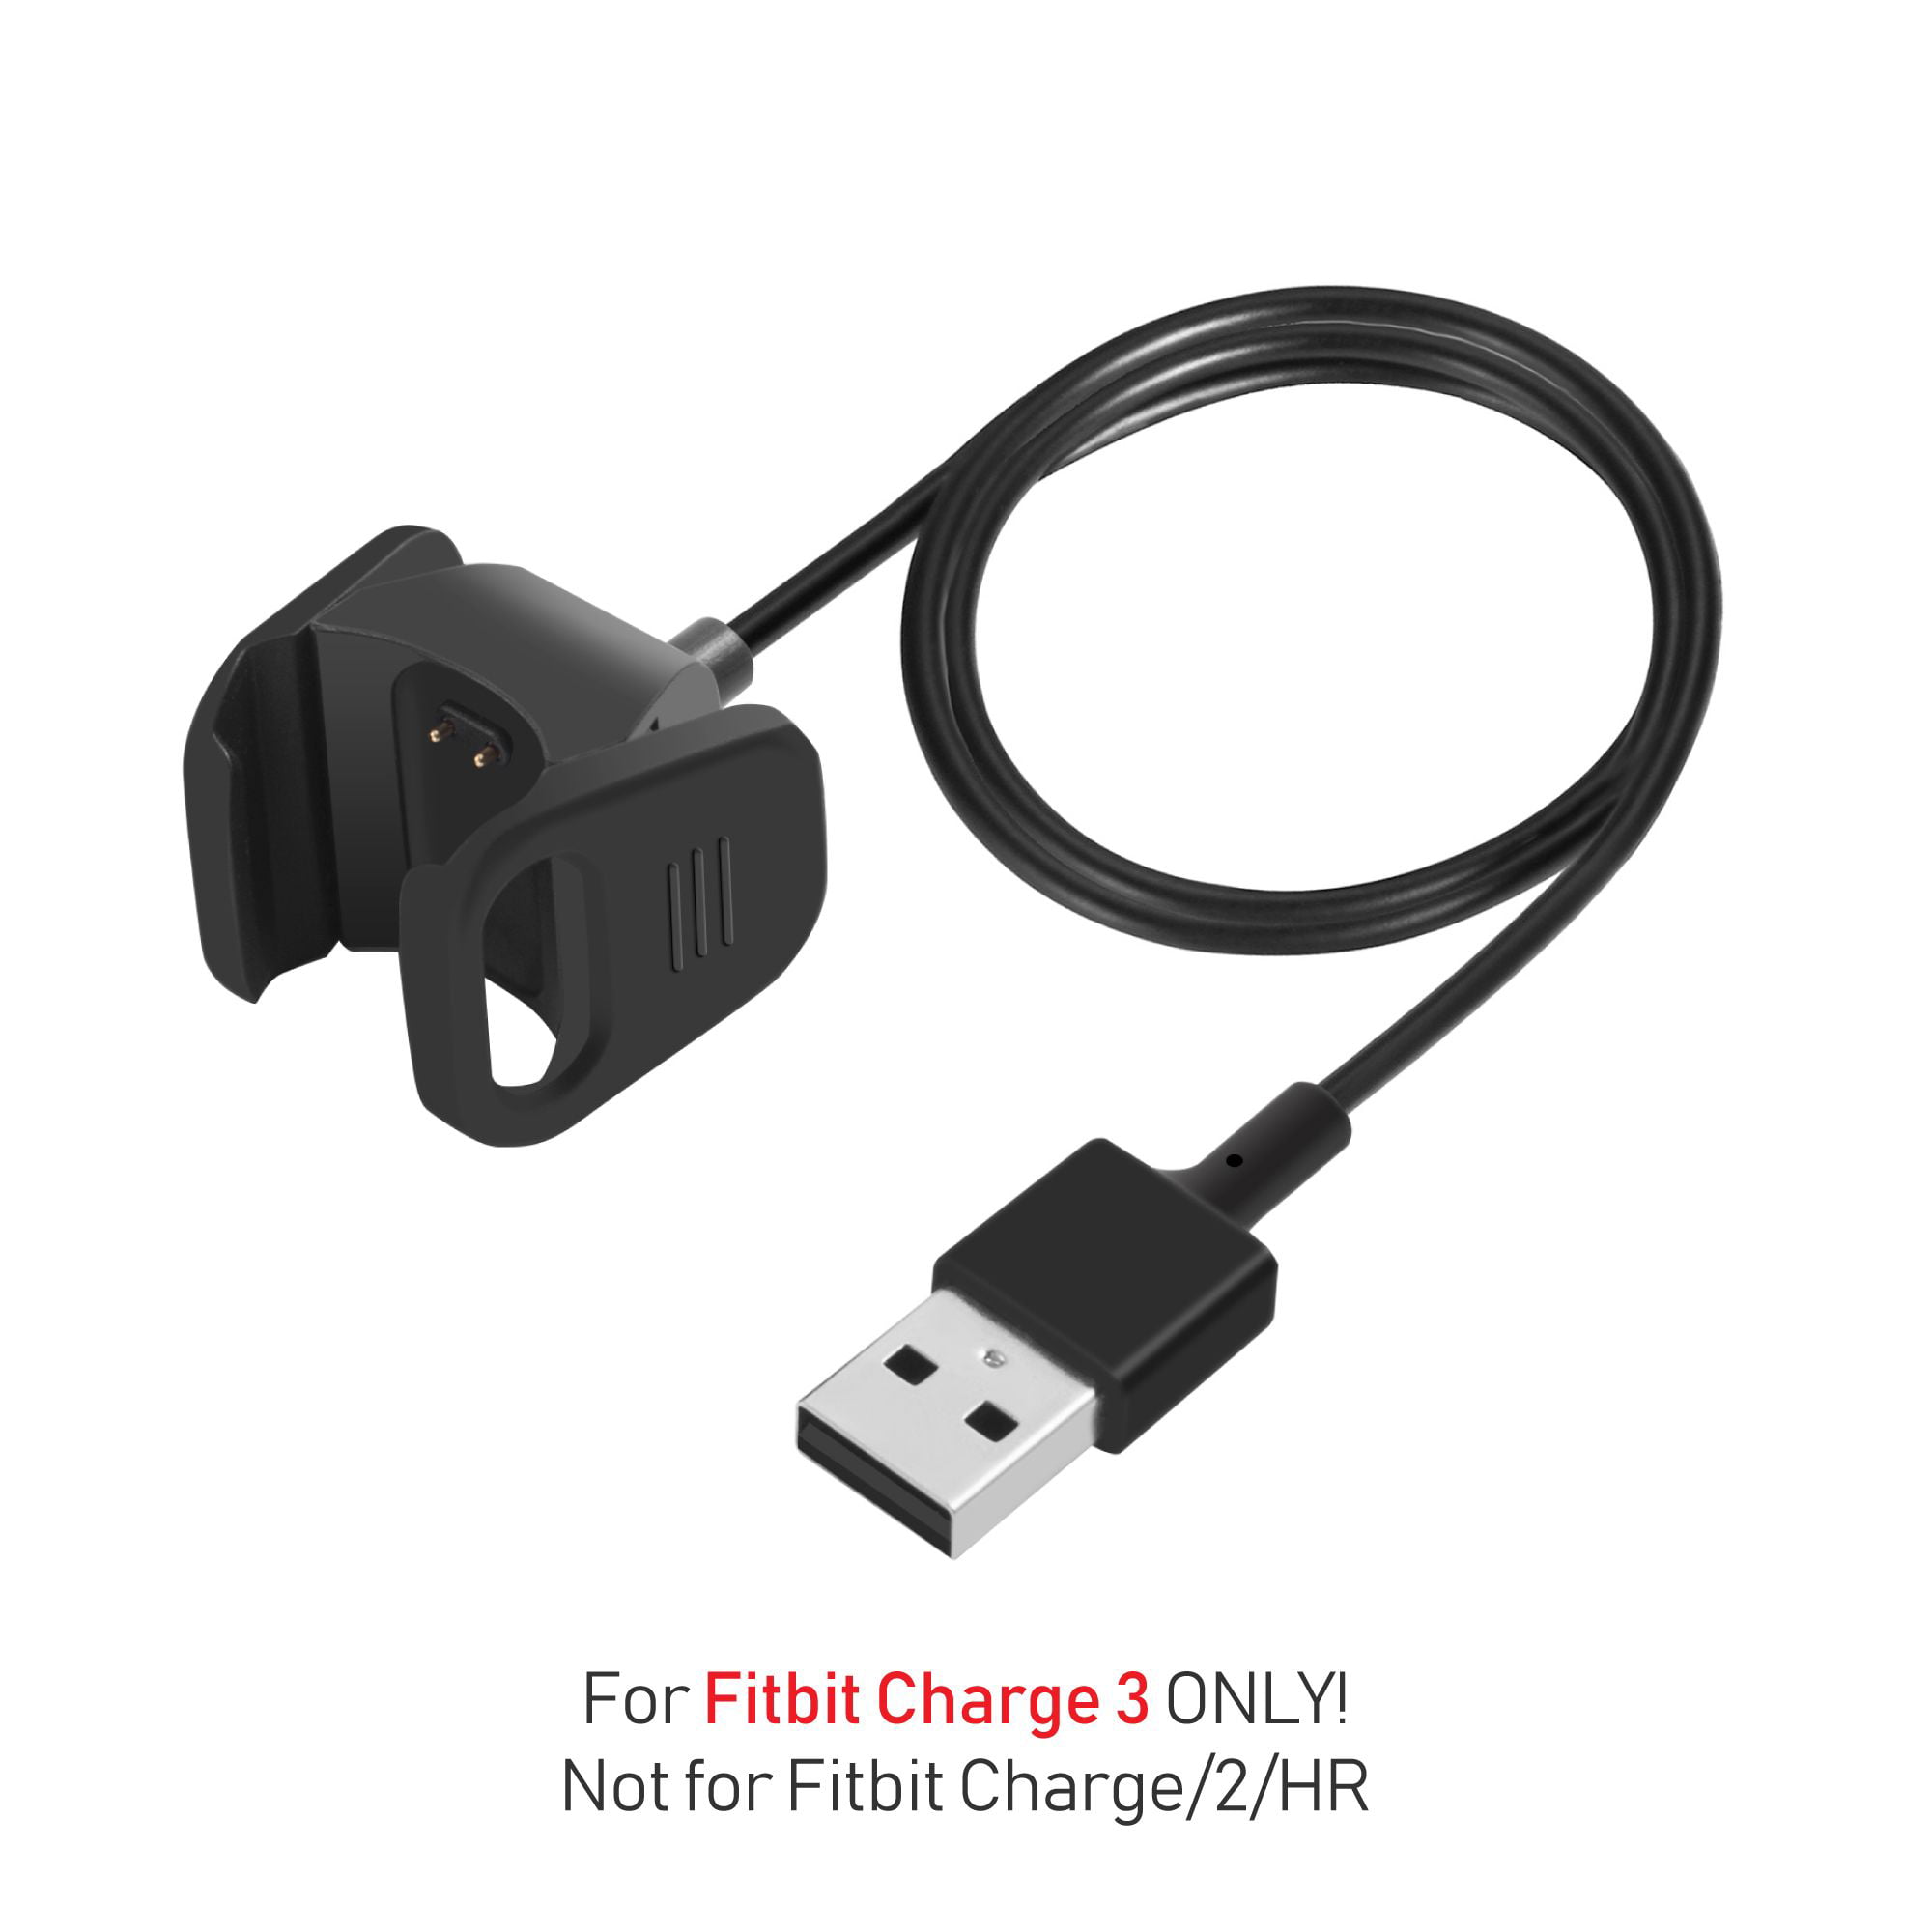 Fitbit Charge 3 Replacement USB Charger Charging Cable BEST Dock L6X8 